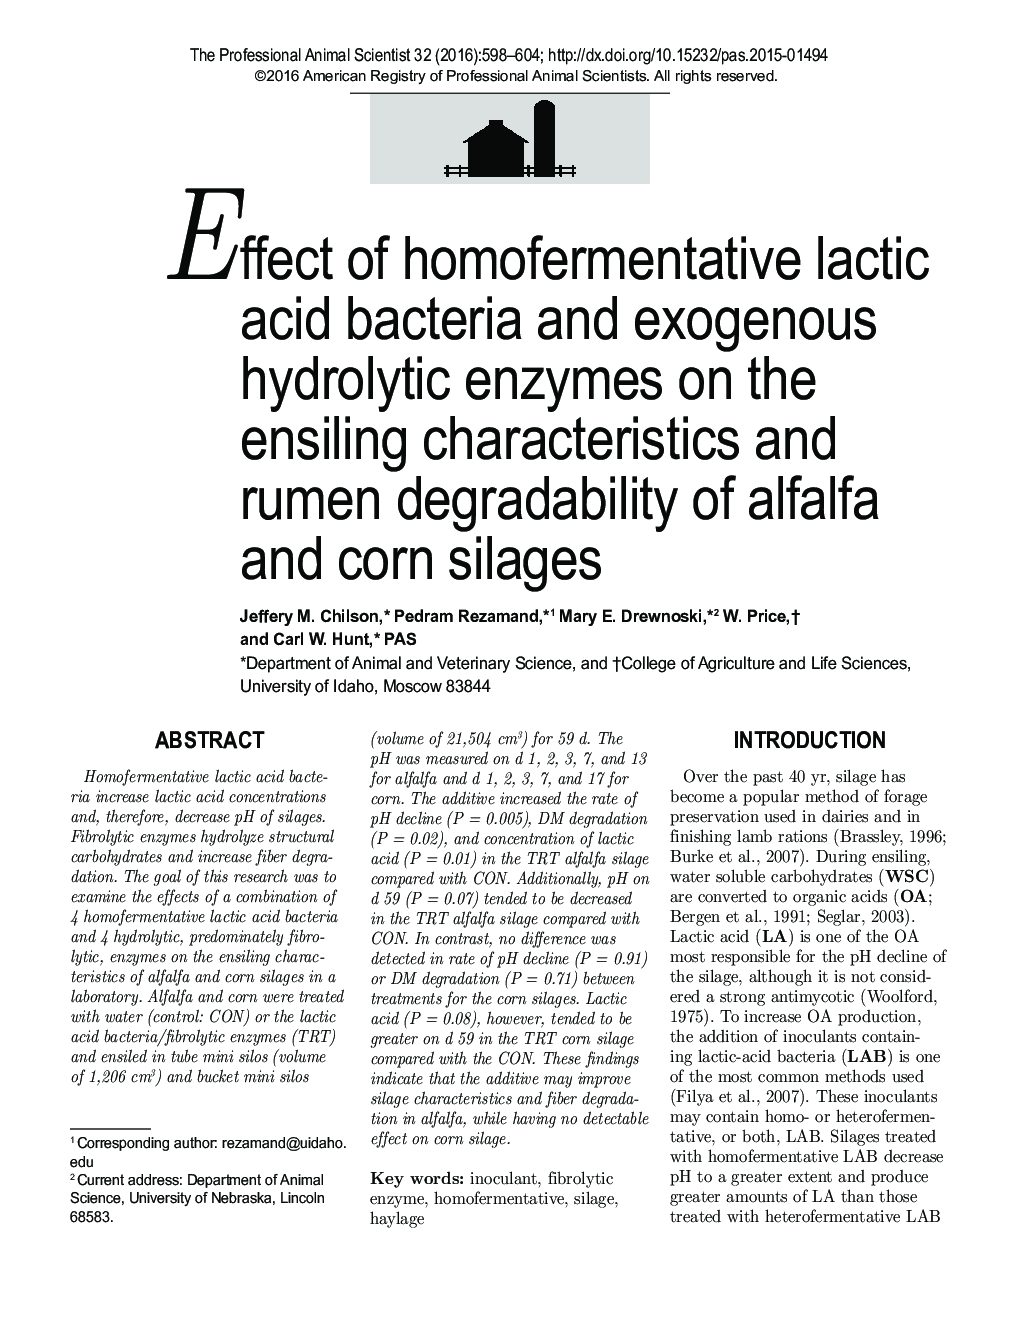 Effect of homofermentative lactic acid bacteria and exogenous hydrolytic enzymes on the ensiling characteristics and rumen degradability of alfalfa and corn silages